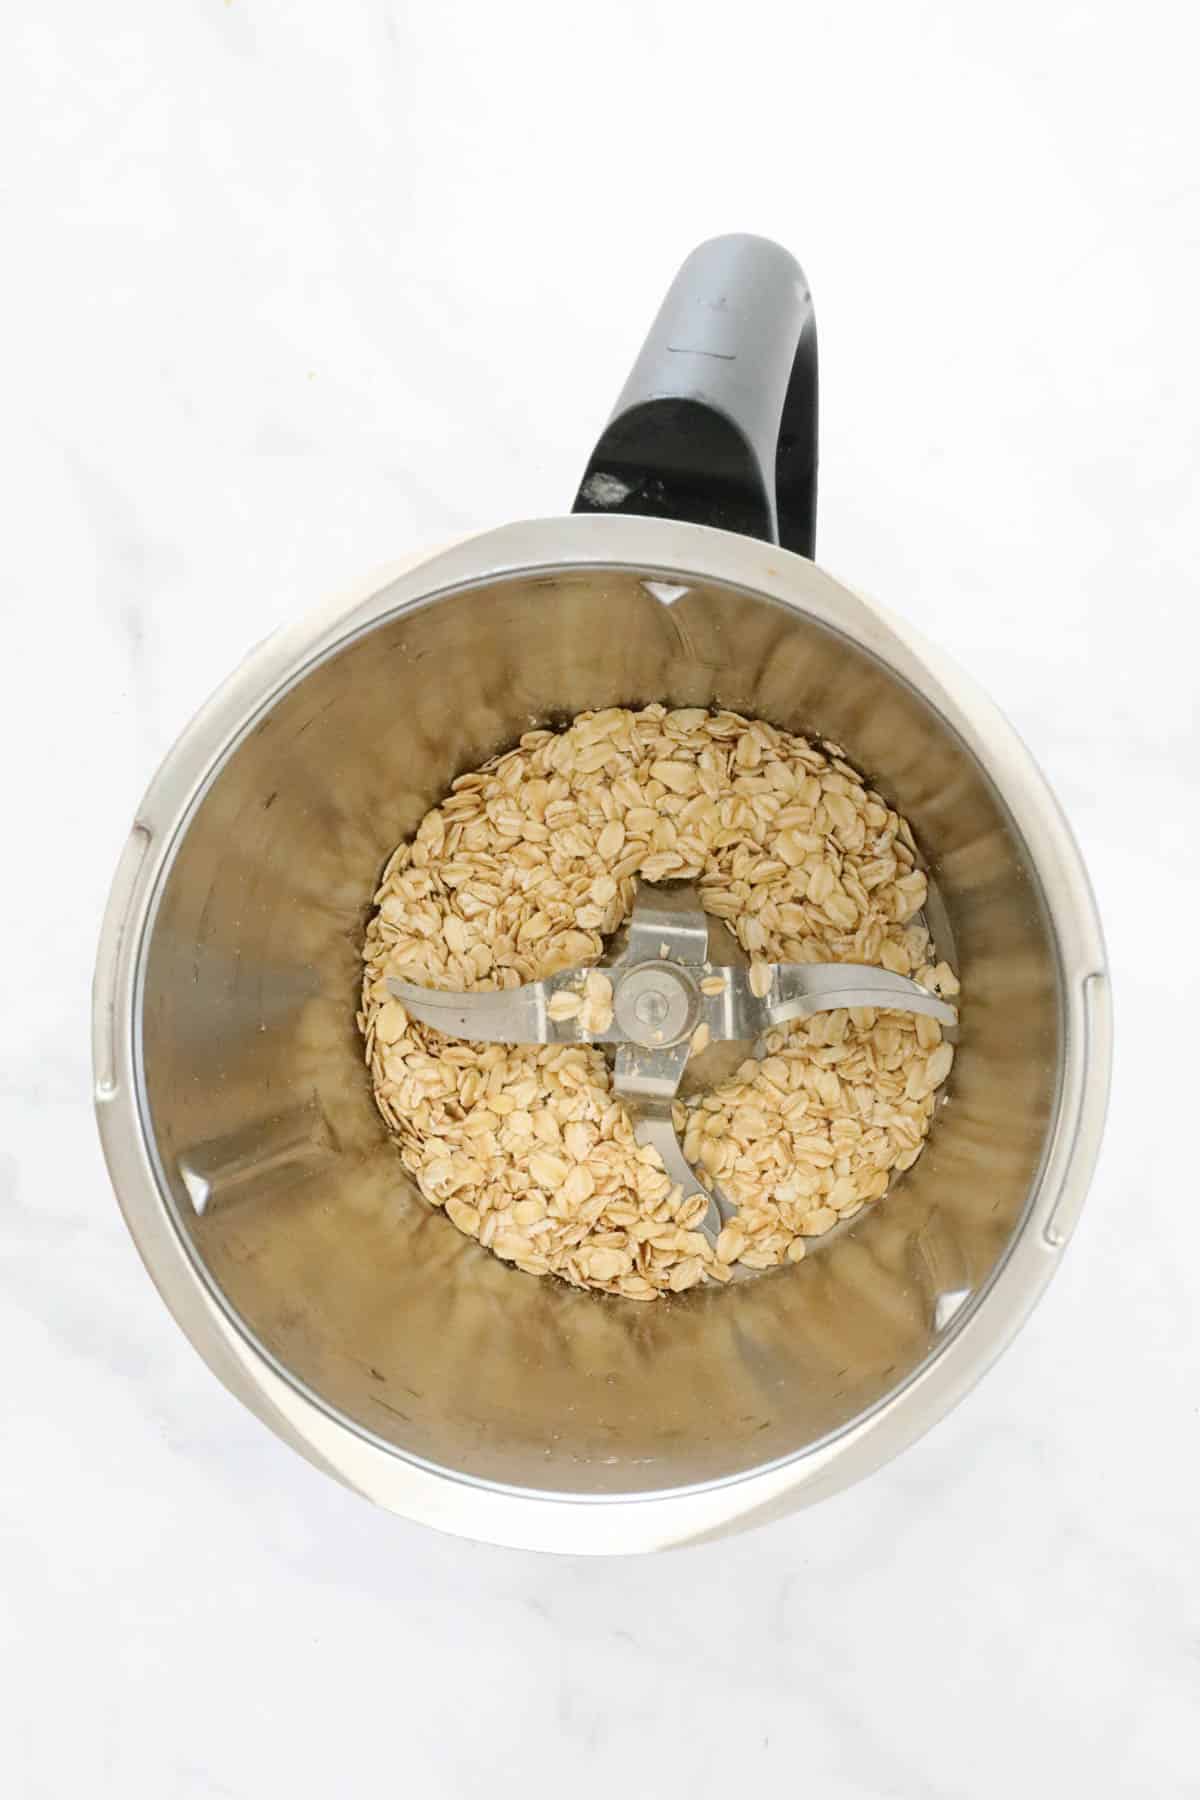 Rolled oats in the bottom of a blender.